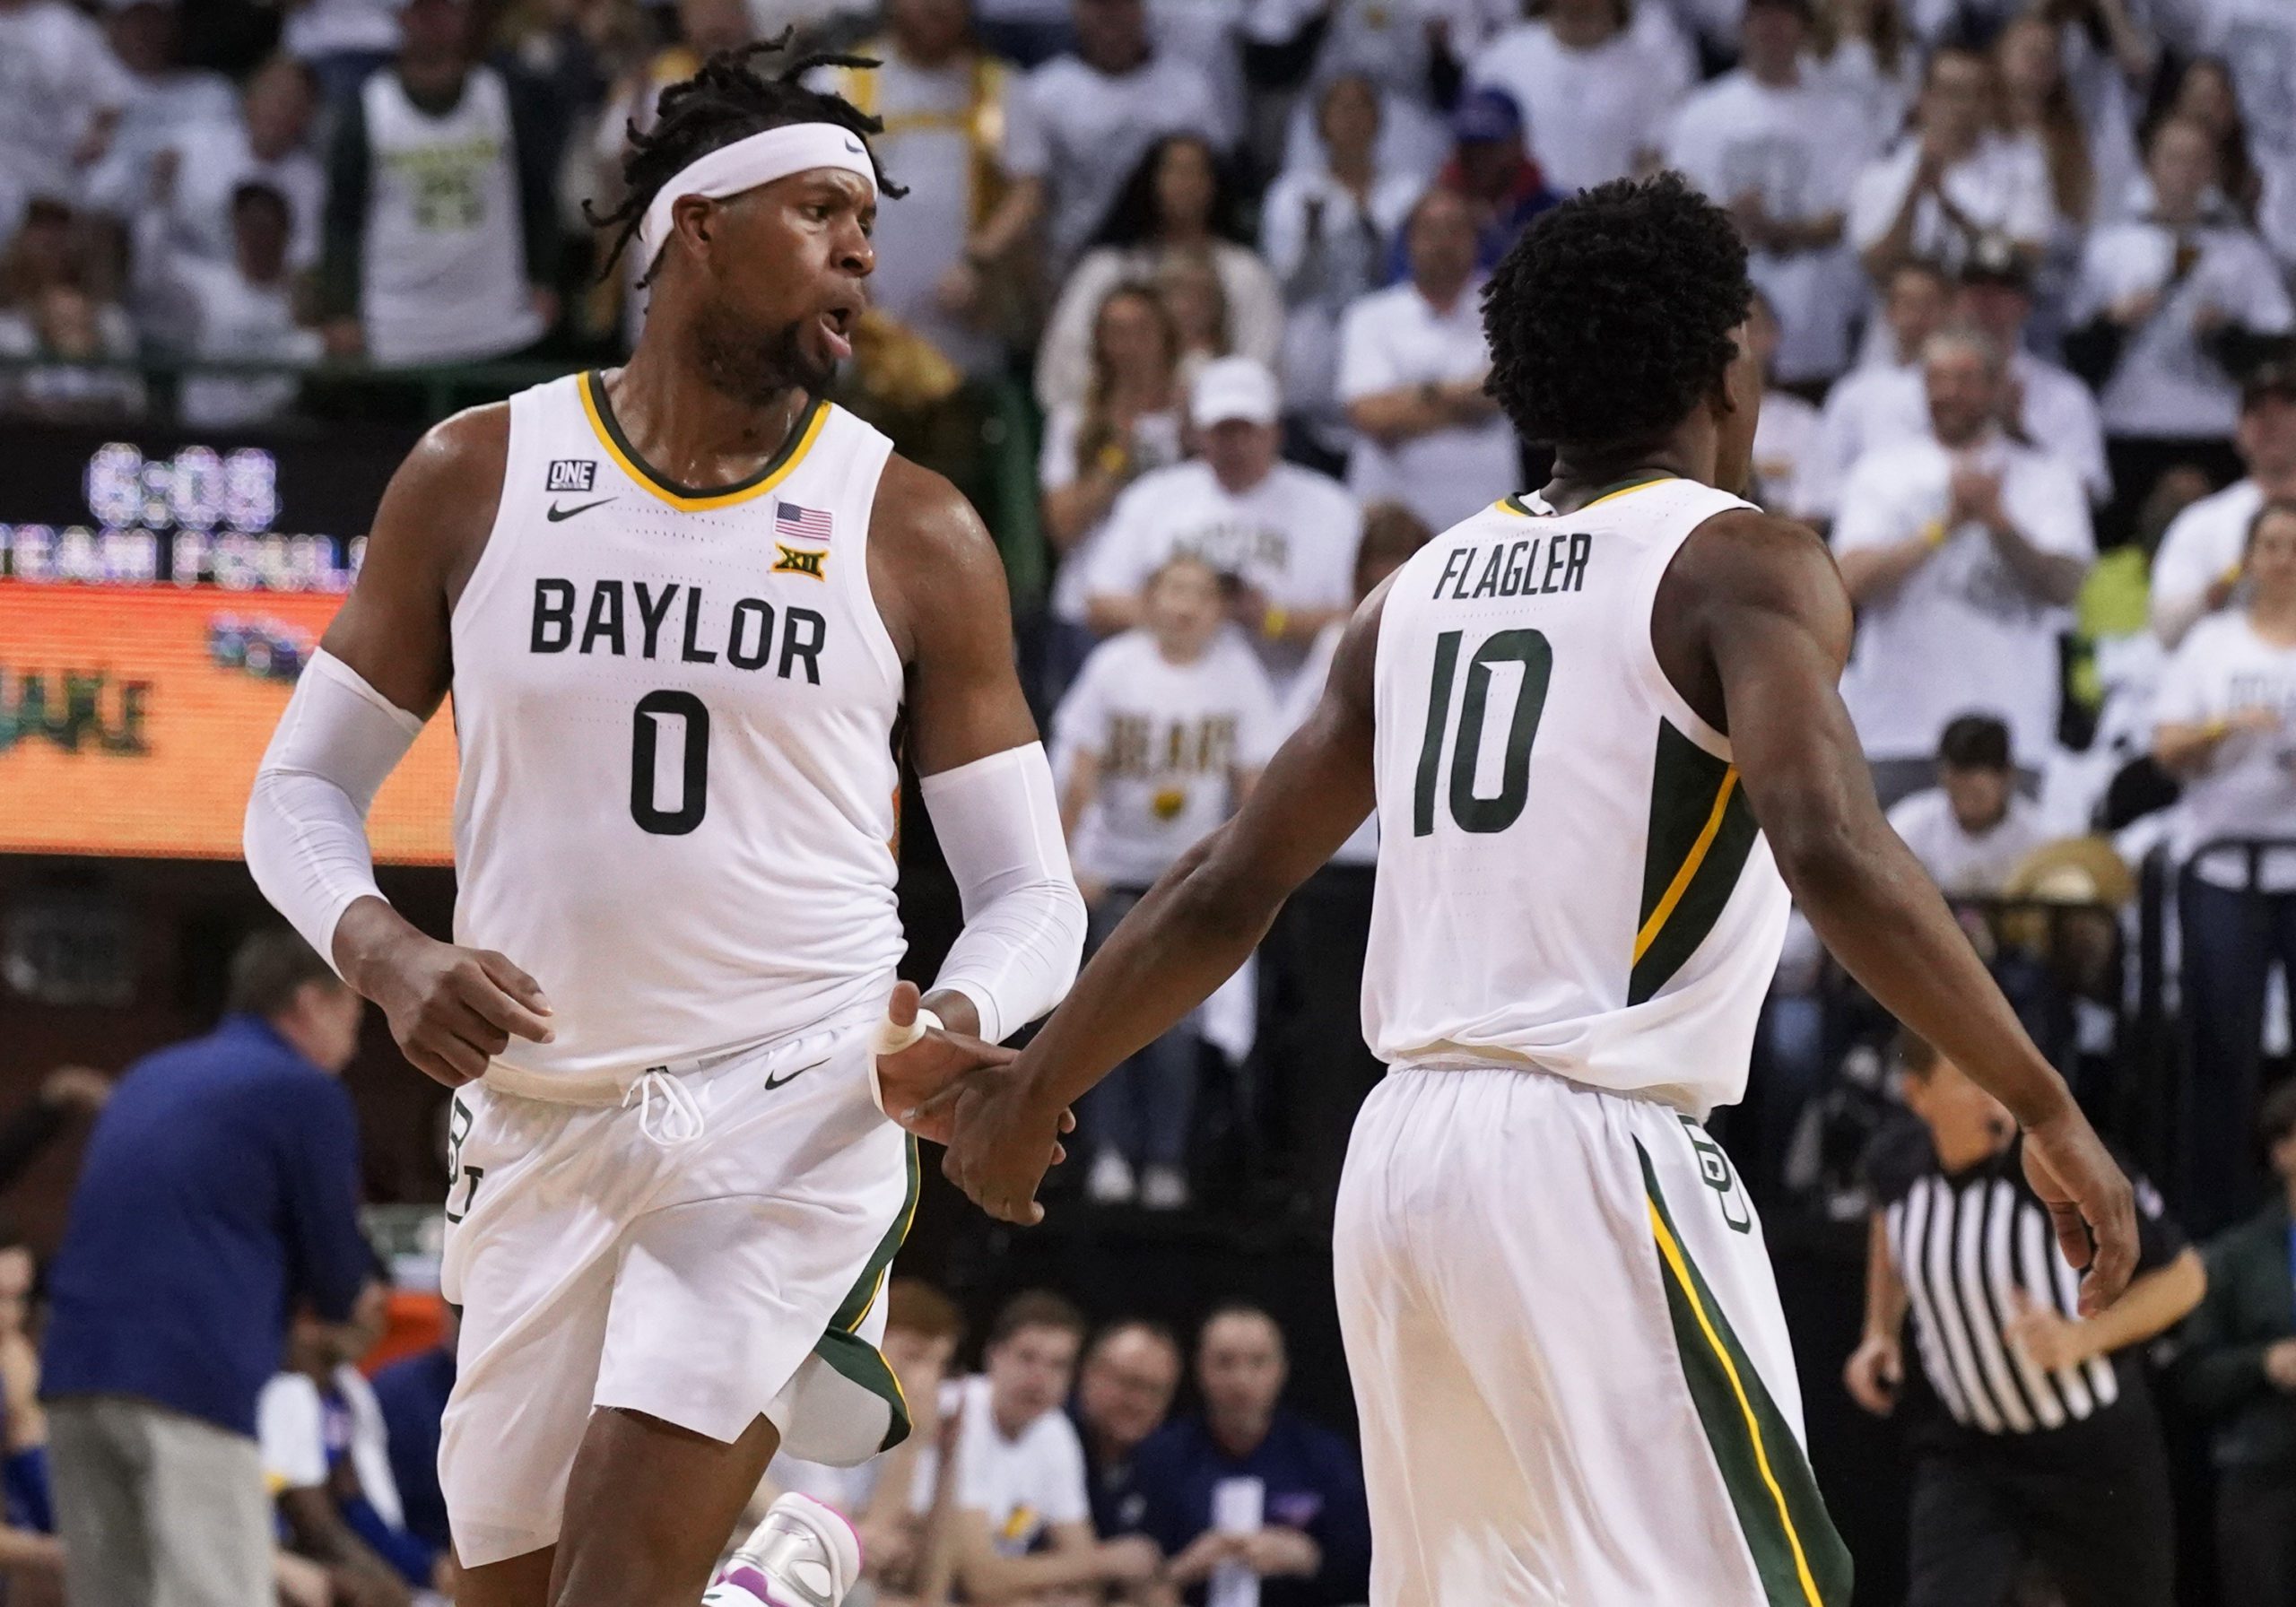 Baylor Basketball Rises to No. 3 After Weekend of Historic Upsets